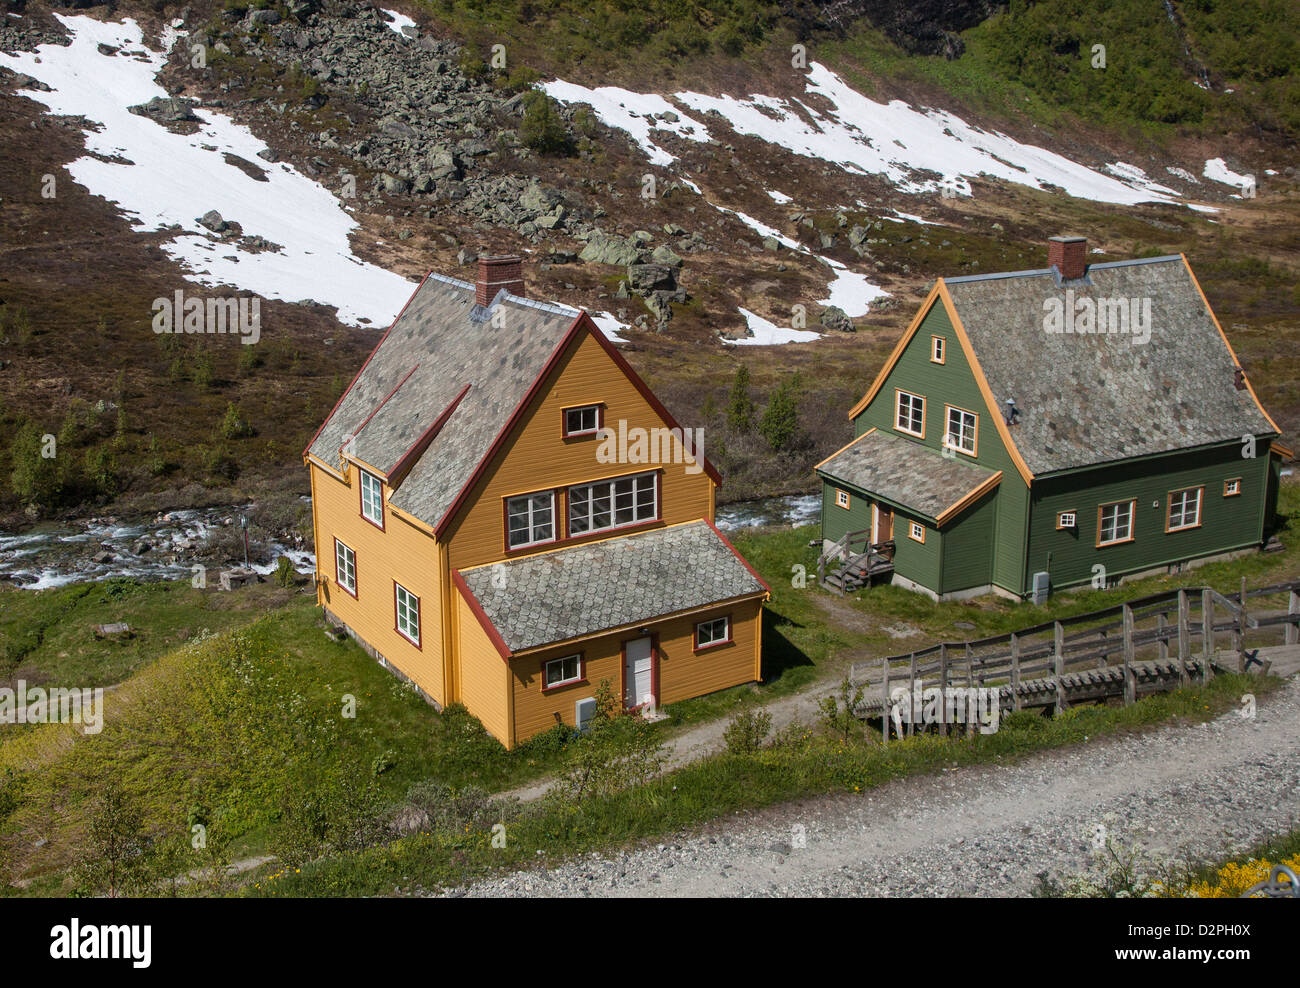 Homes near Myrdal train station on the Bergen Railway, connecting Bergen and Oslo Norway along with Flam via the Flåm Railway. Stock Photo